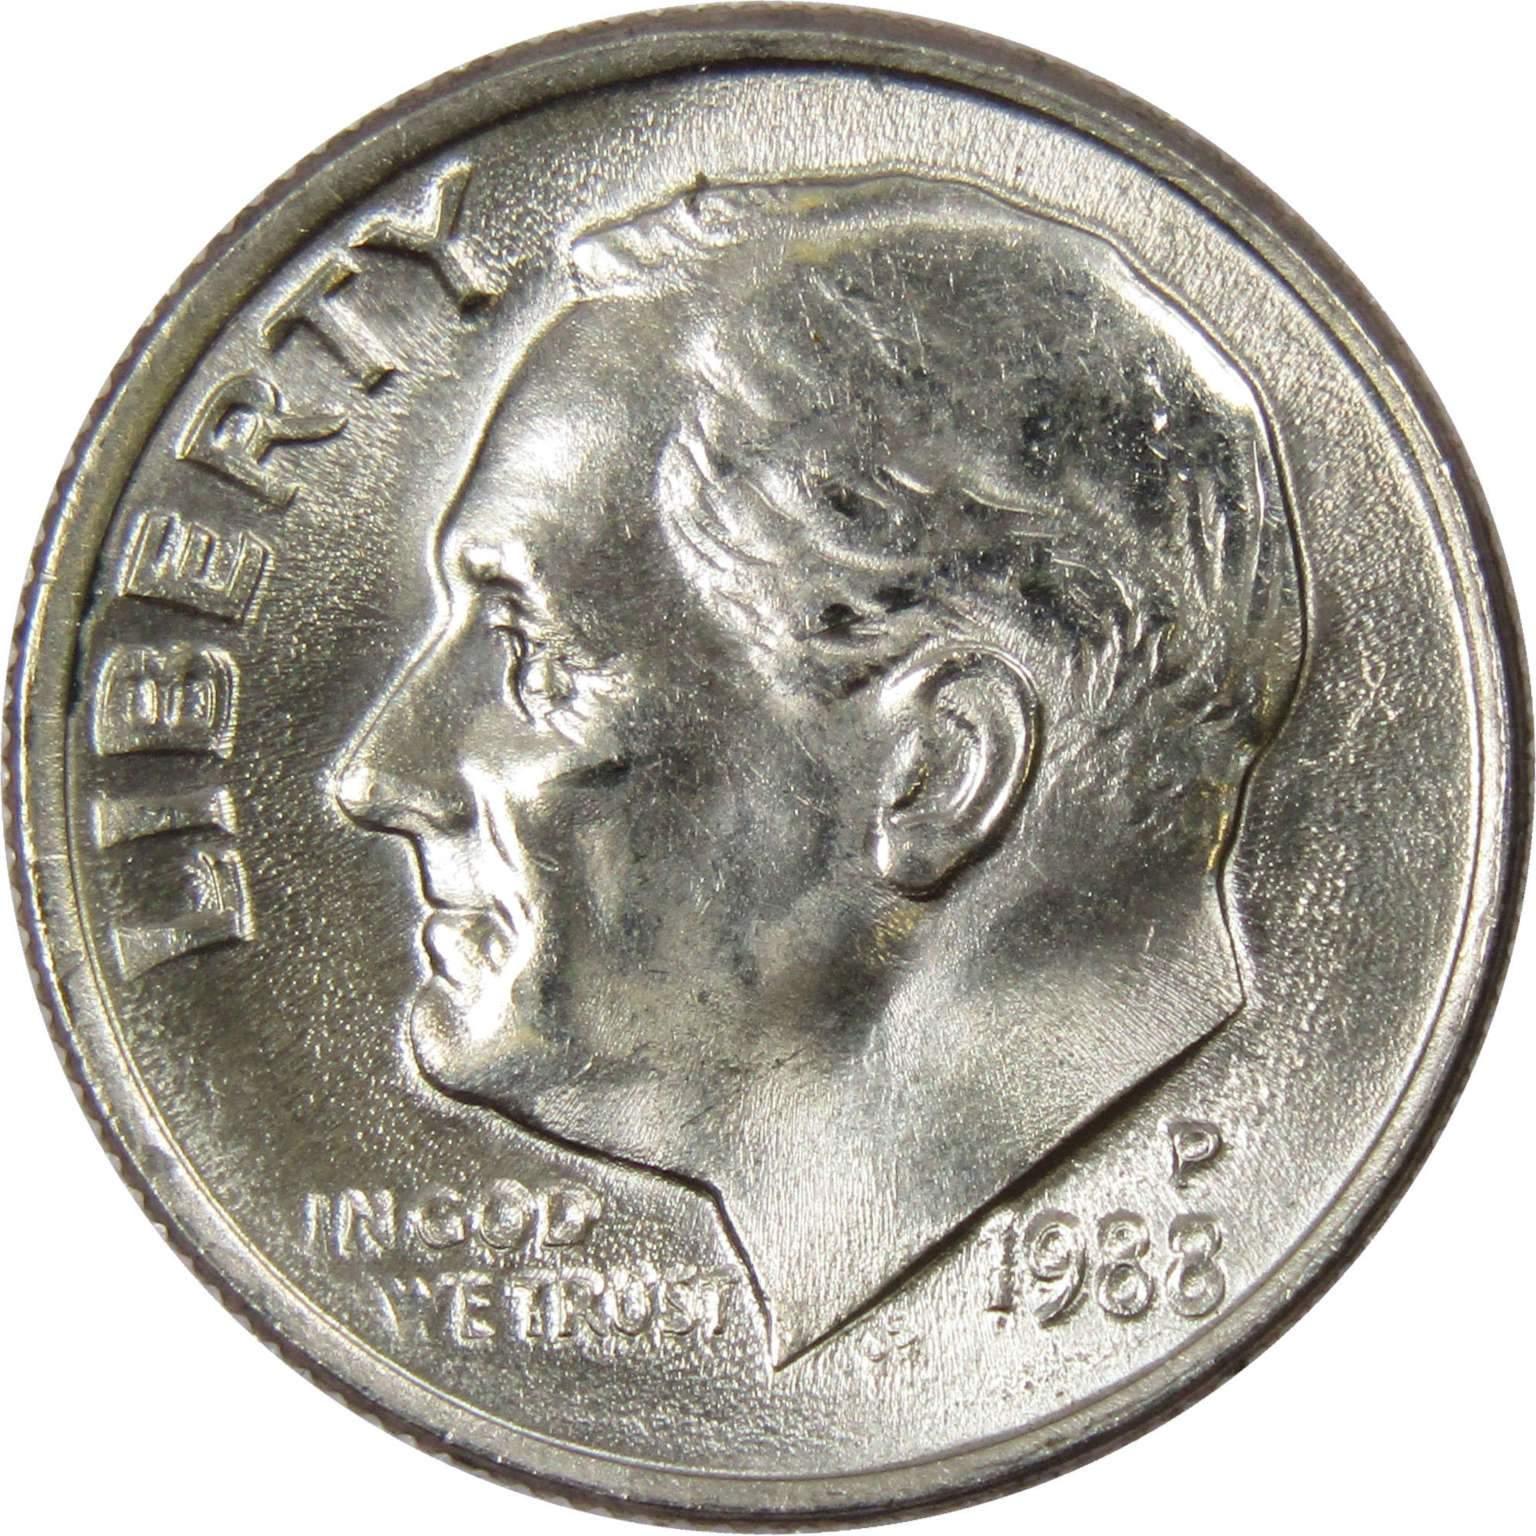 1988 P Roosevelt Dime BU Uncirculated Mint State 10c US Coin Collectible